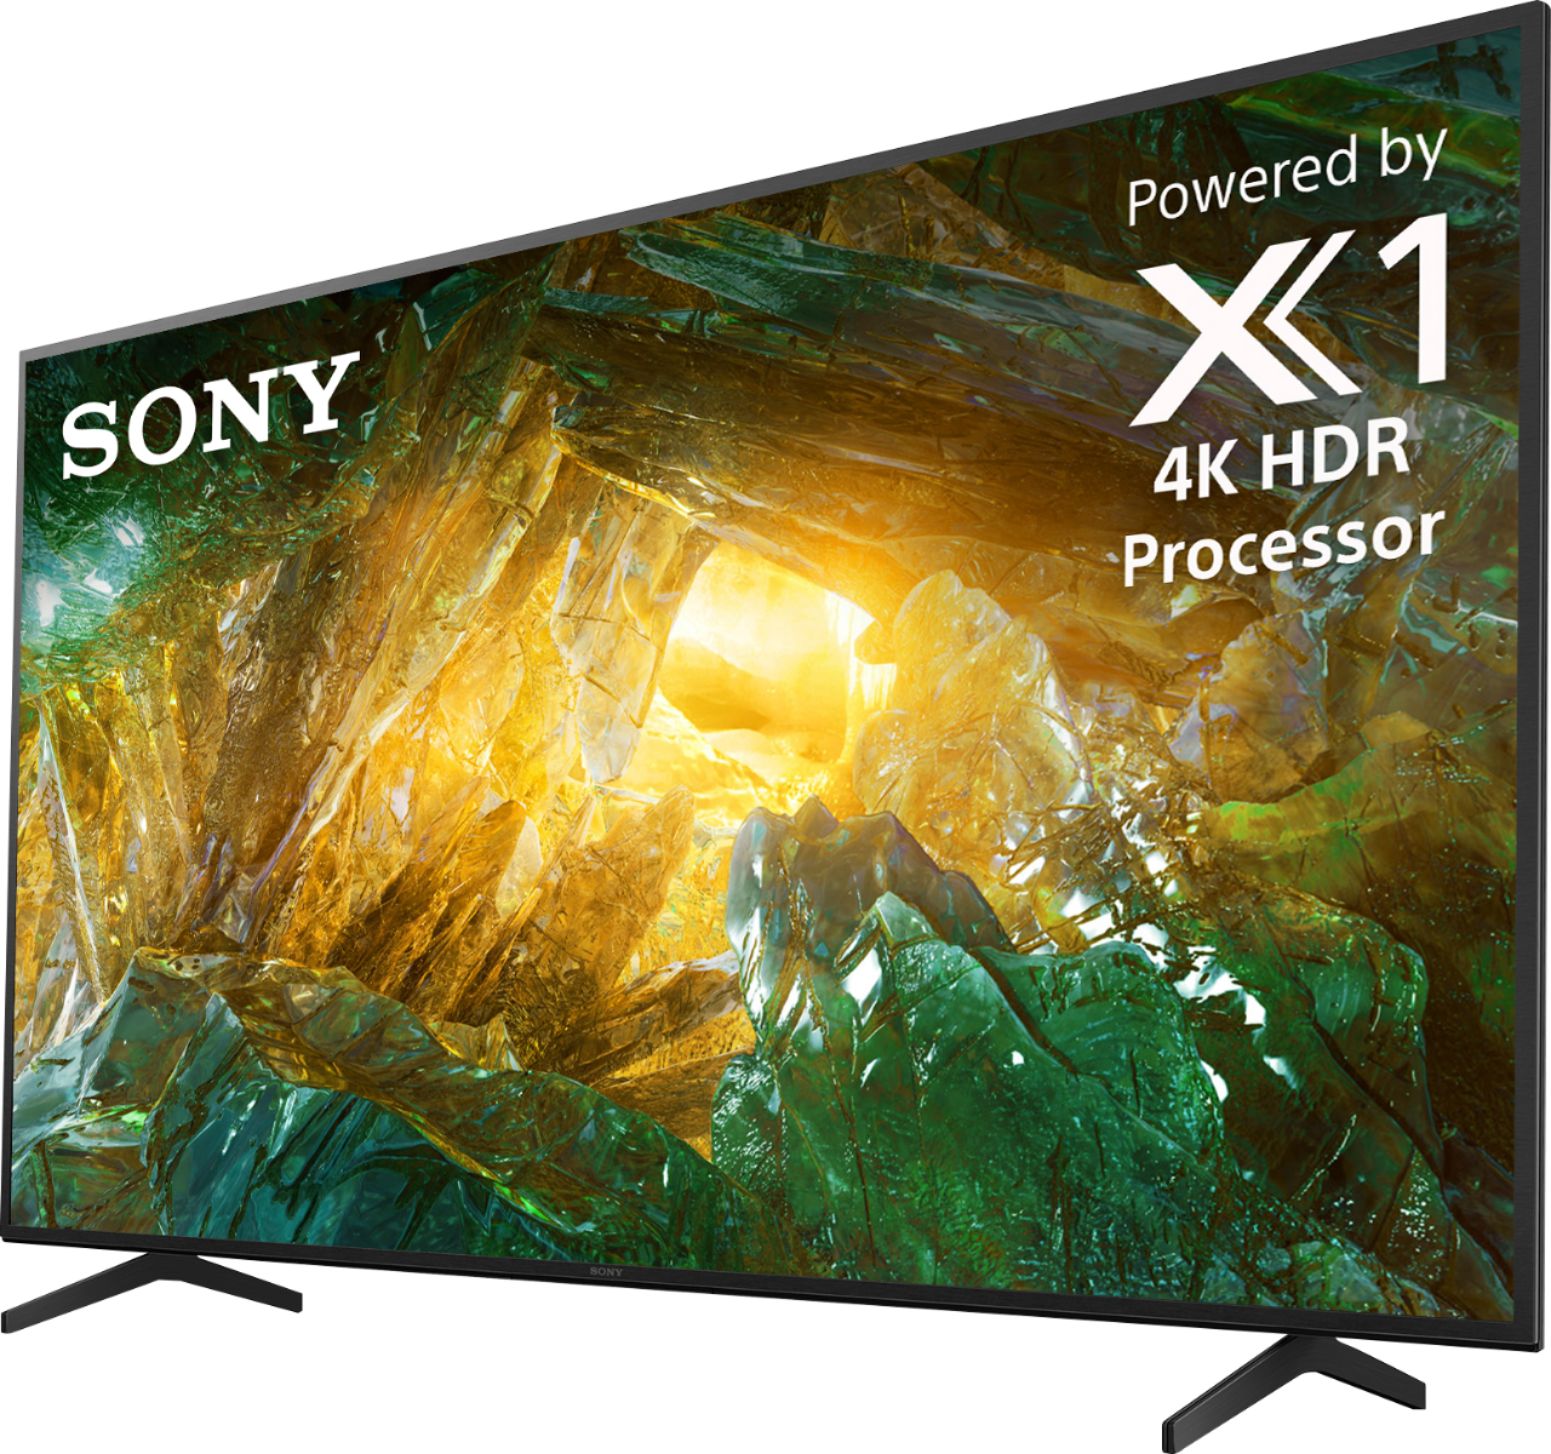 Left View: Sony - 55" Class X800H Series LED 4K UHD Smart Android TV